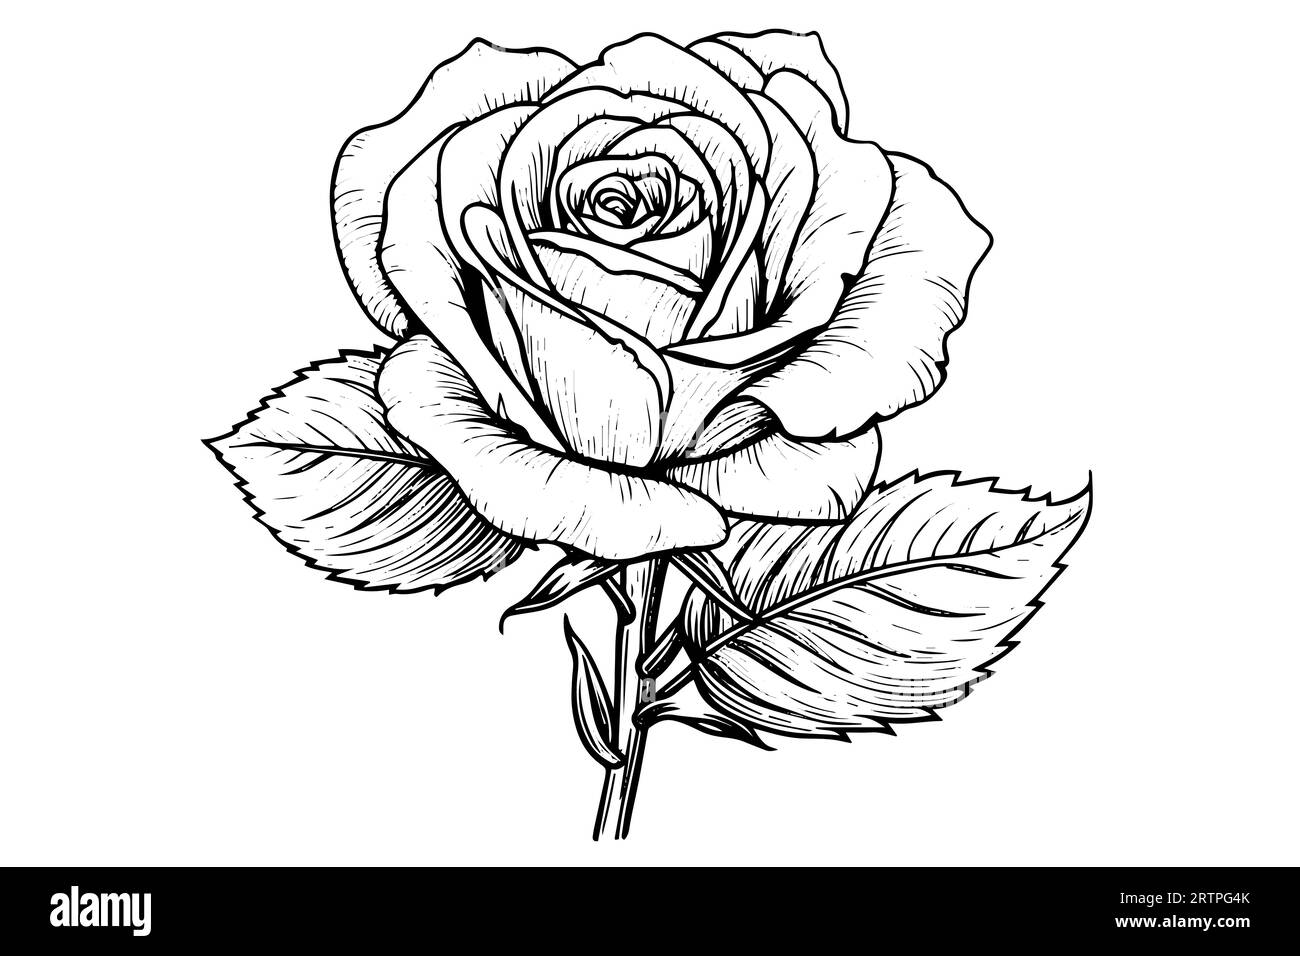 Vintage rose flower engraving calligraphic .Victorian style tattoo ...